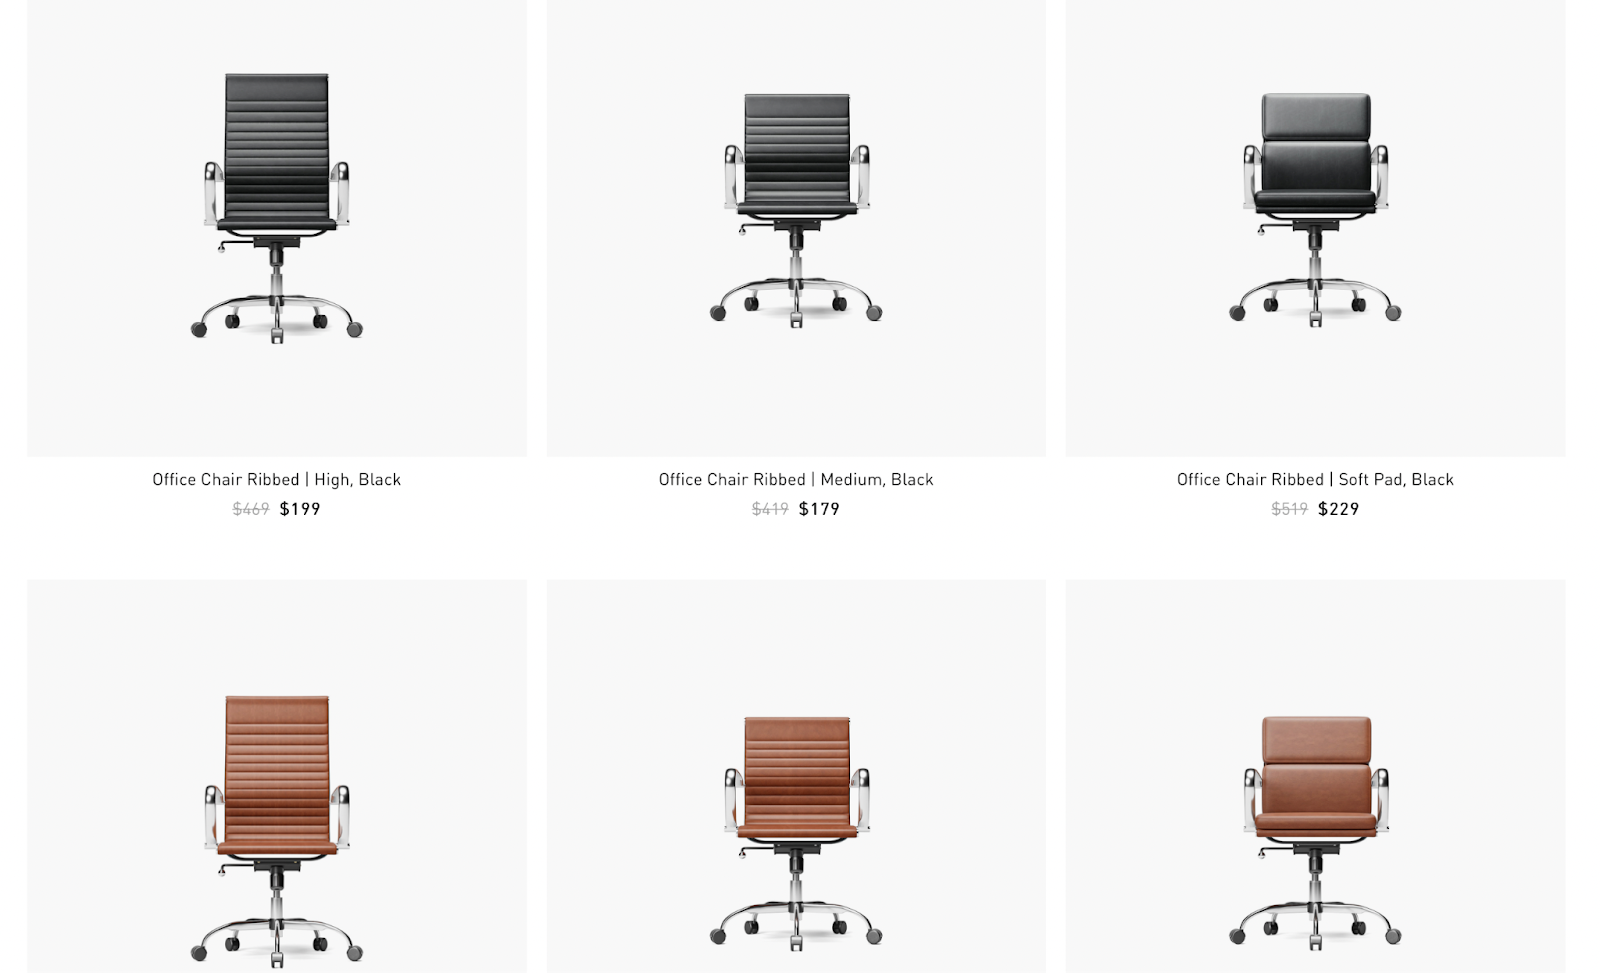 Office chairs from Icons of Manhattan